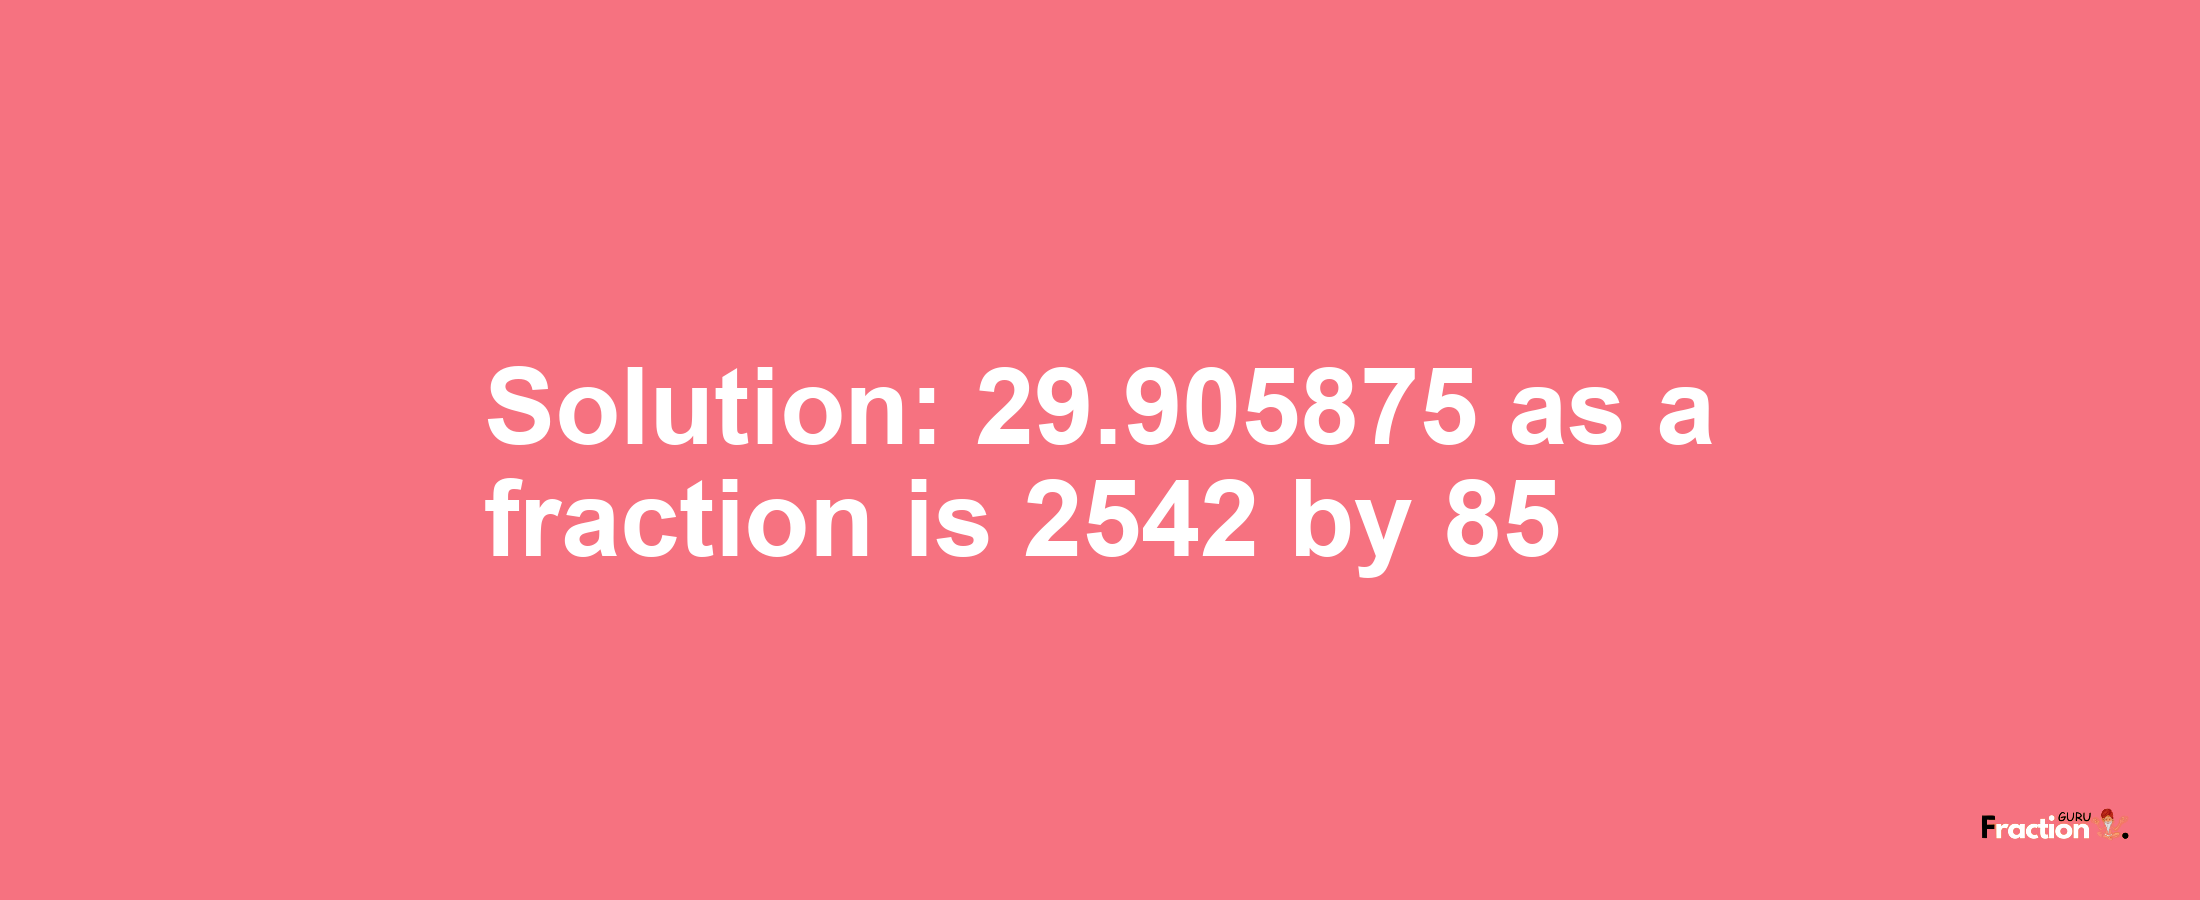 Solution:29.905875 as a fraction is 2542/85